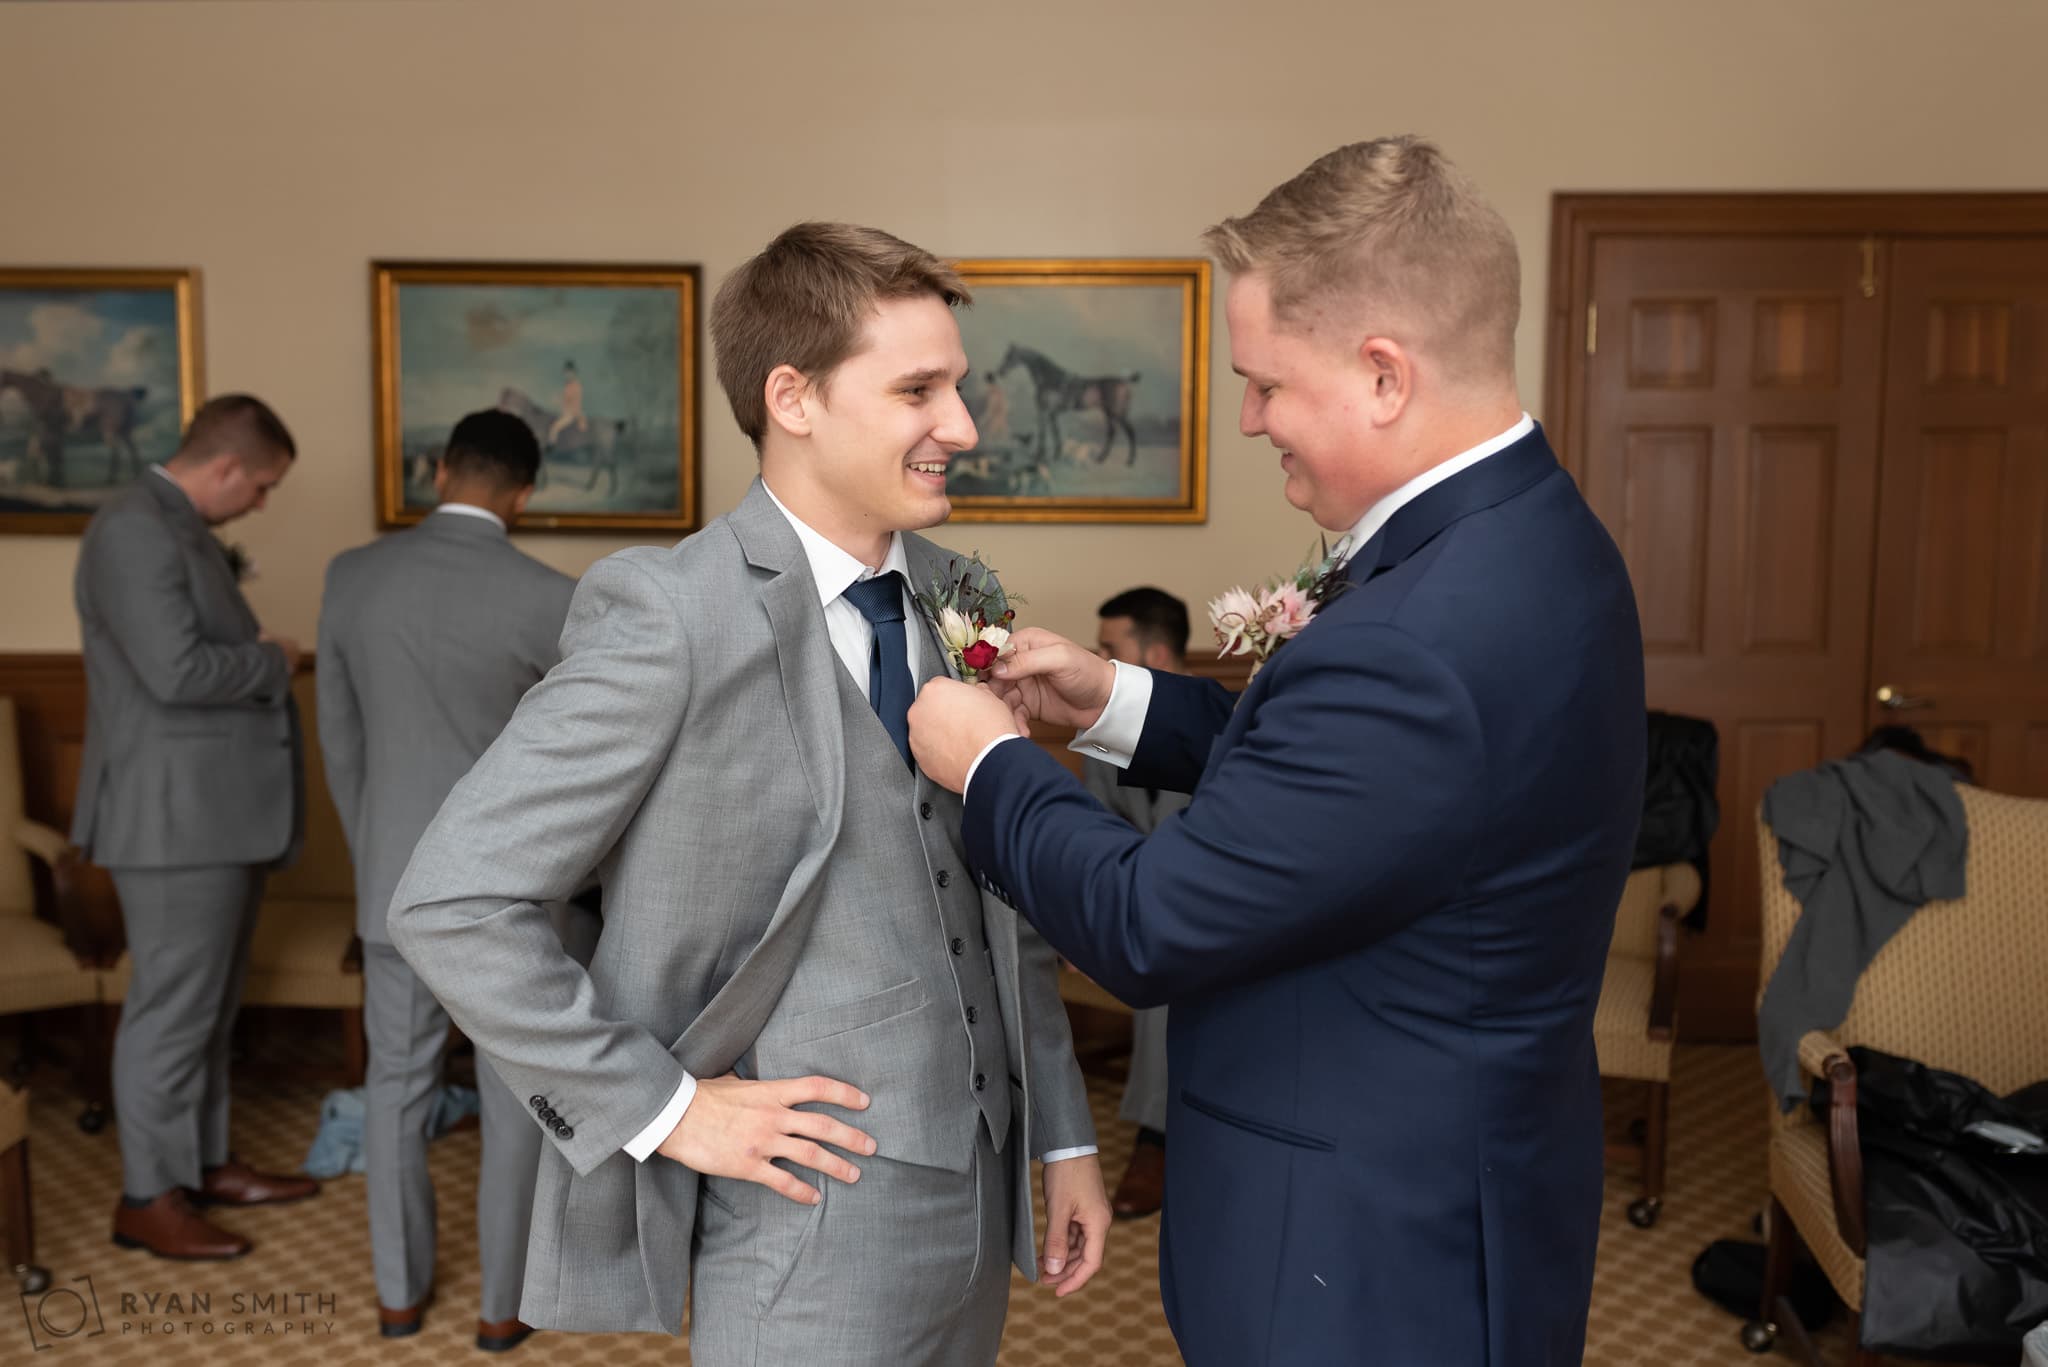 Groom helping groomsmen with his boutonniere